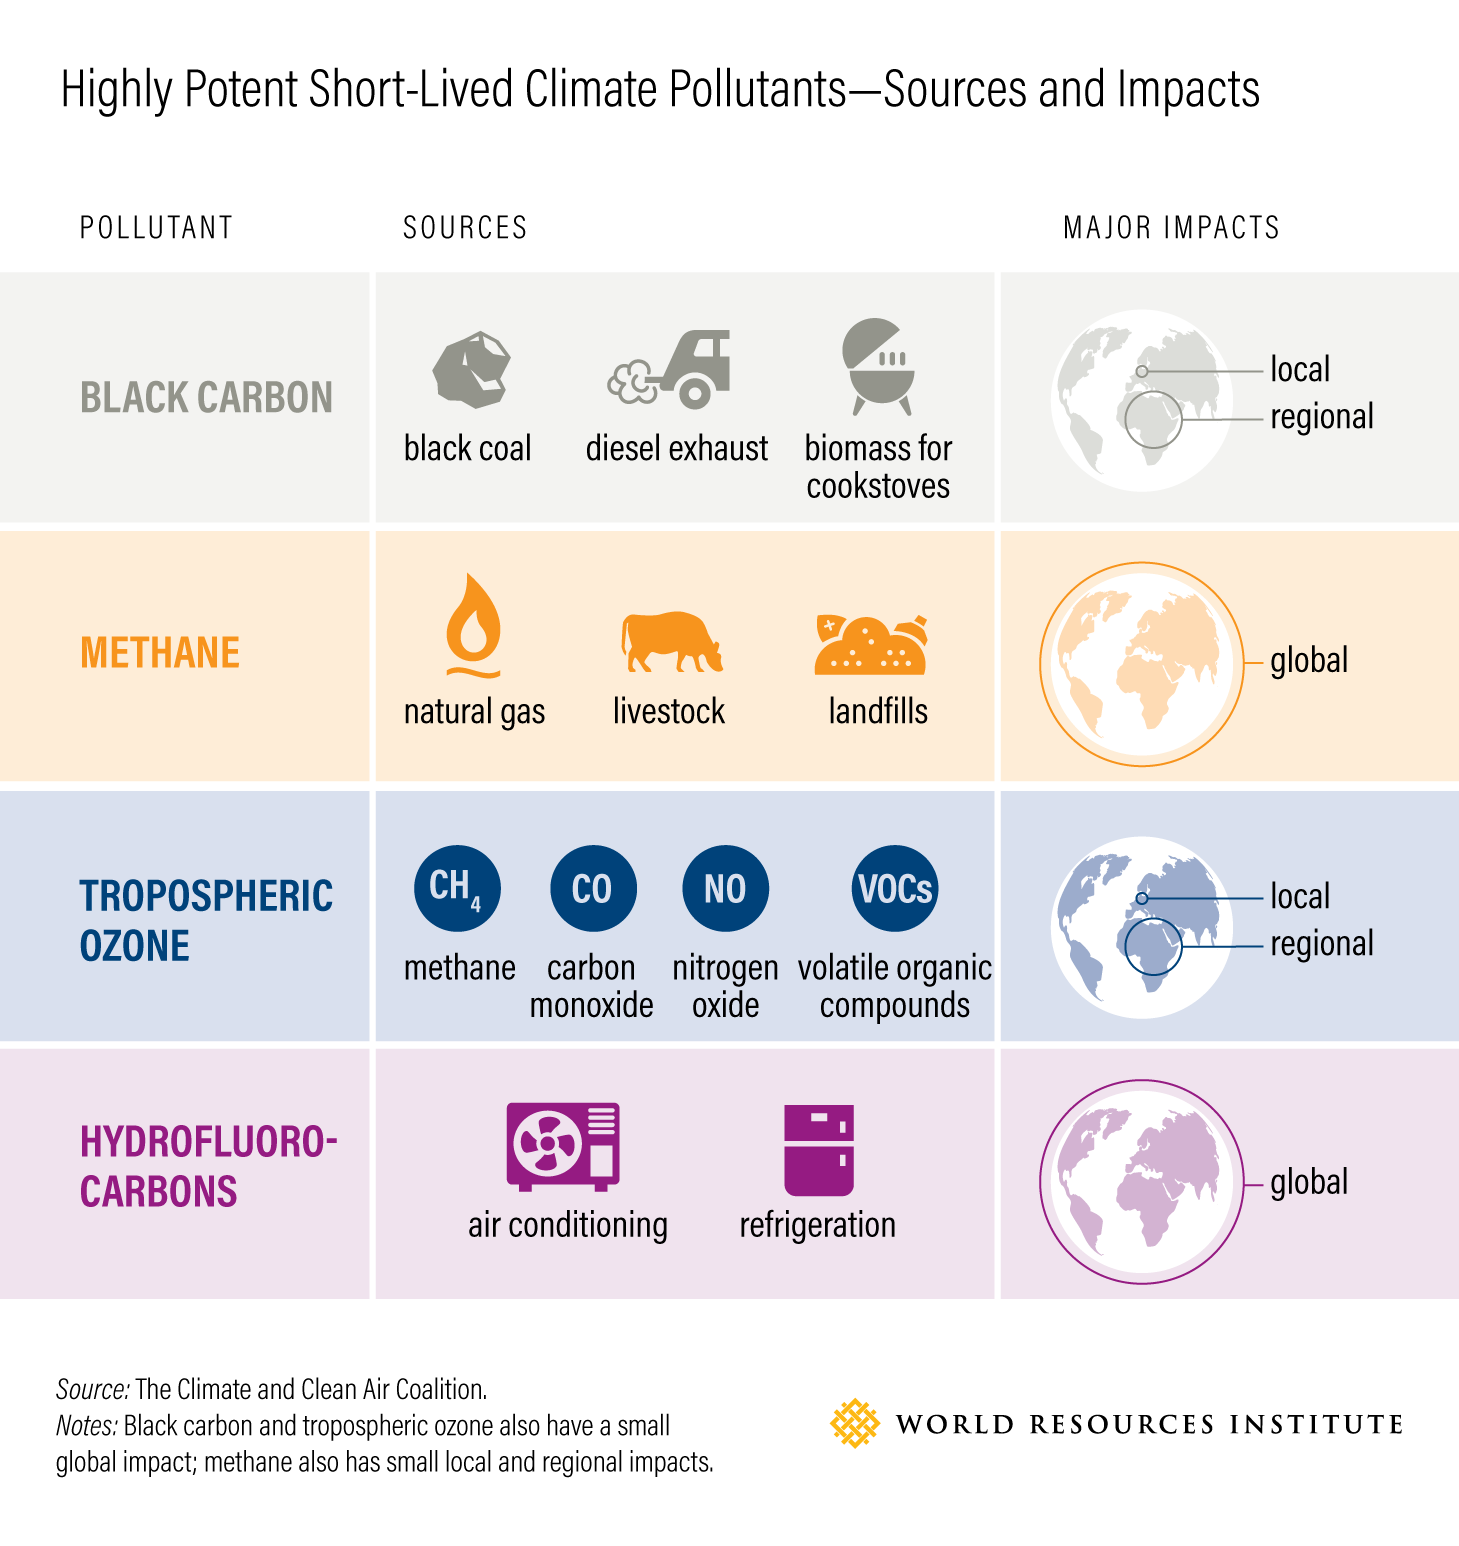 Highly Potent Short-Lived Climate Pollutants—Sources and Impacts